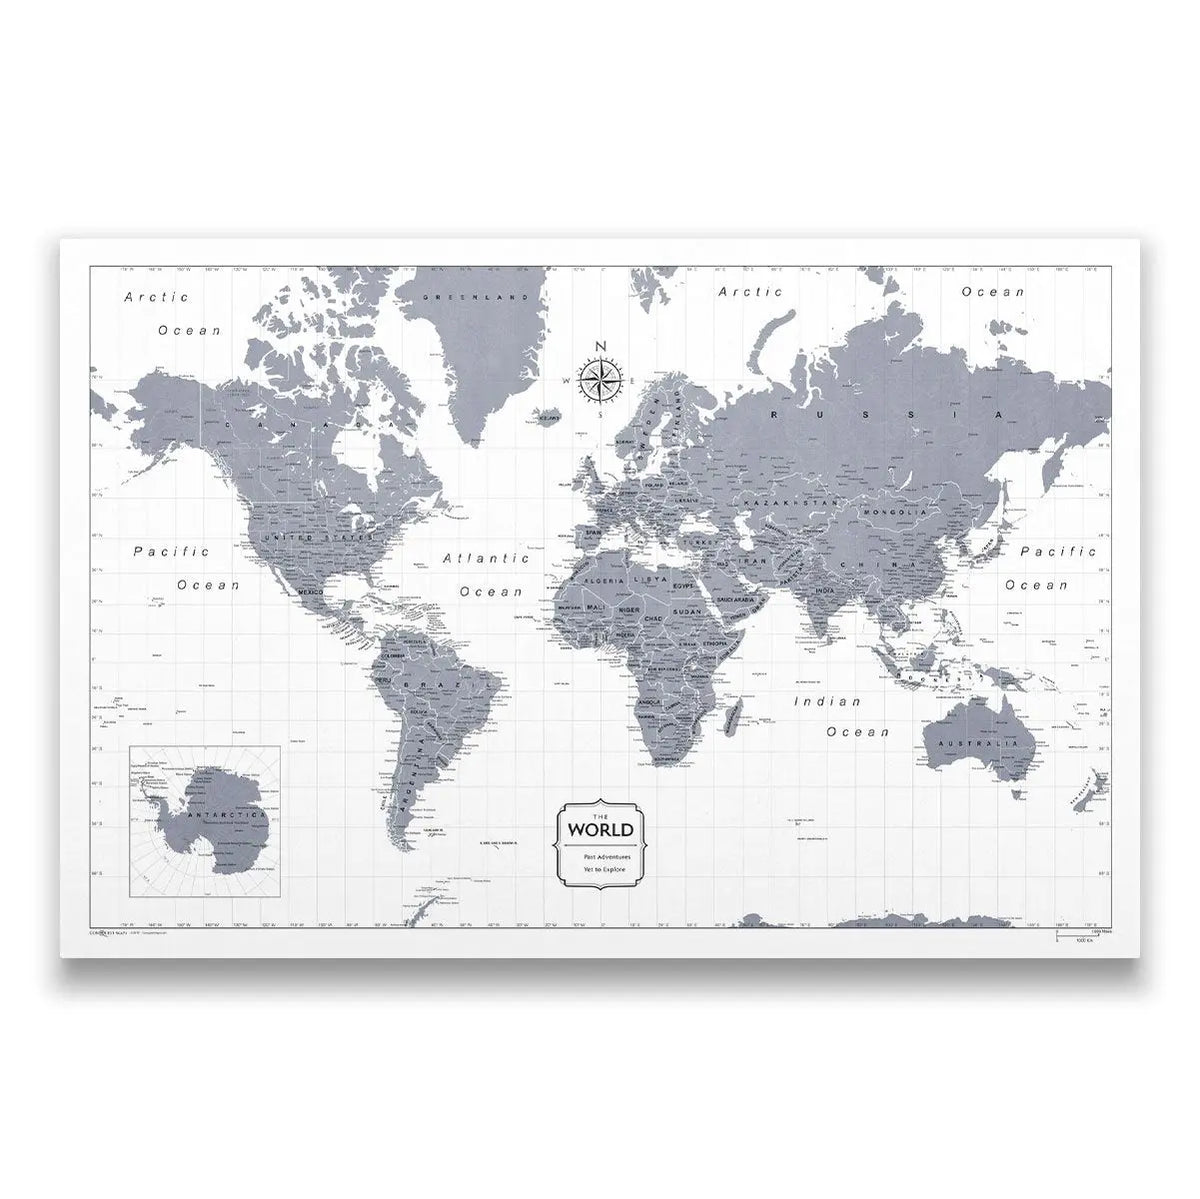 world travel map pin board with push pins dark gray color splash conquest maps llc